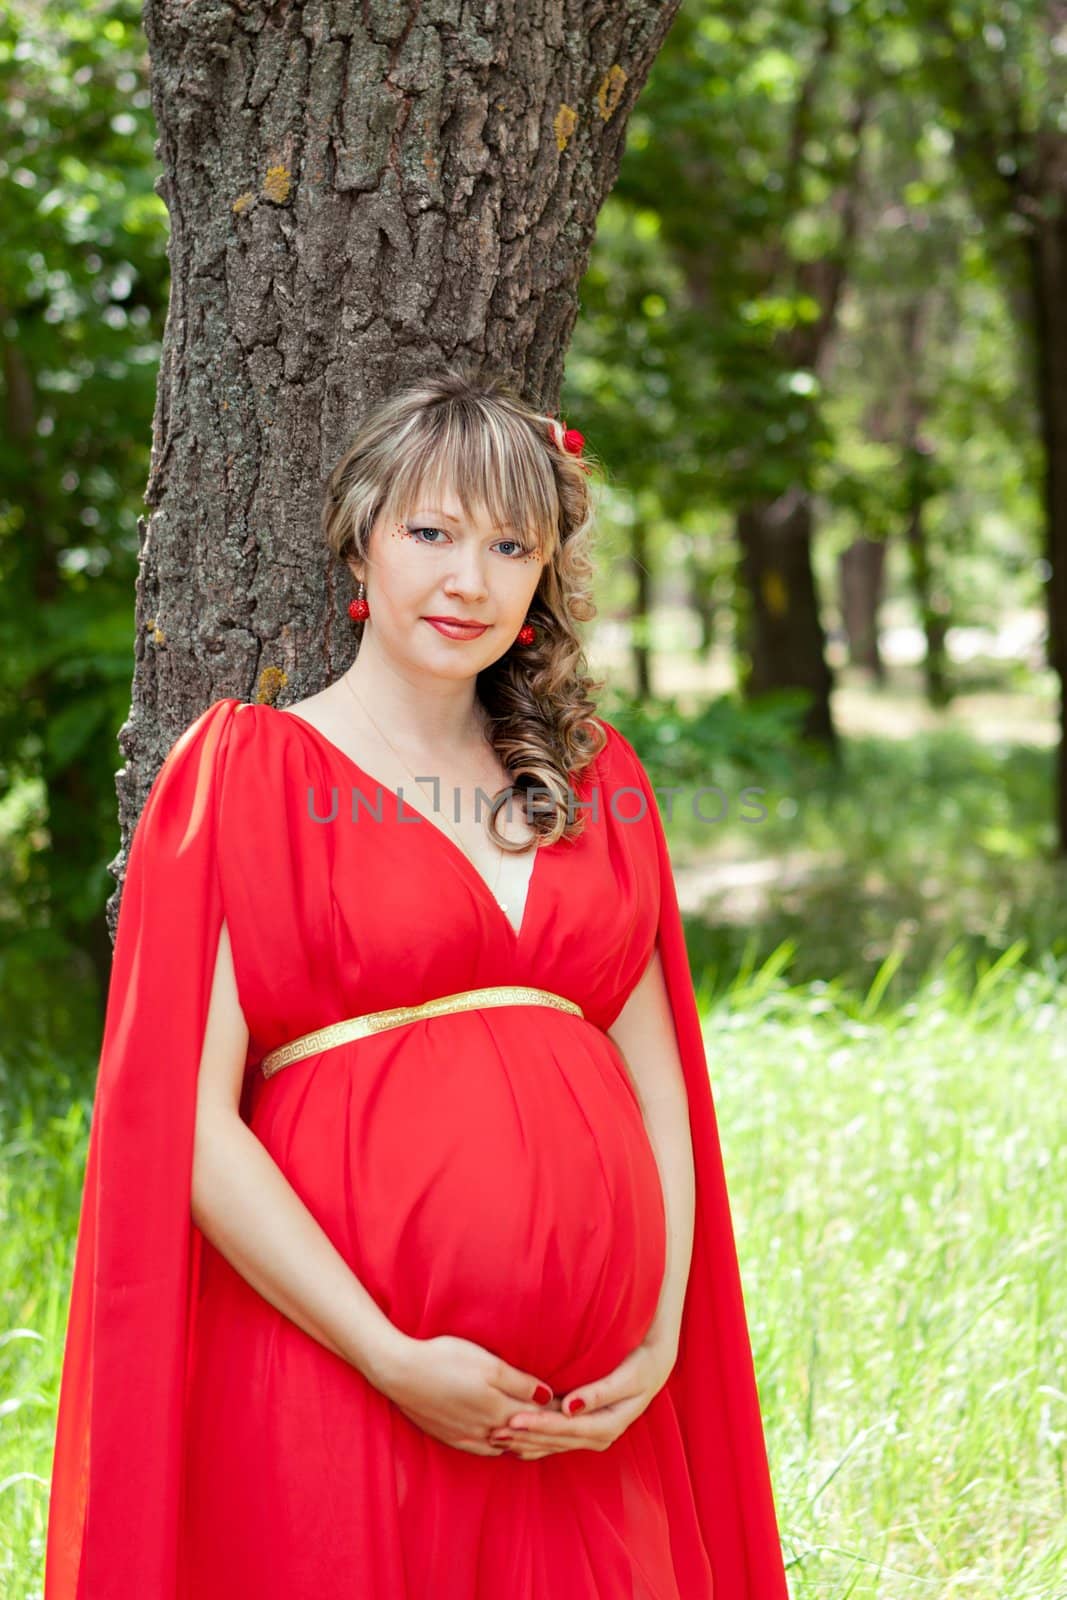 A pregnant woman standing next to a tree.